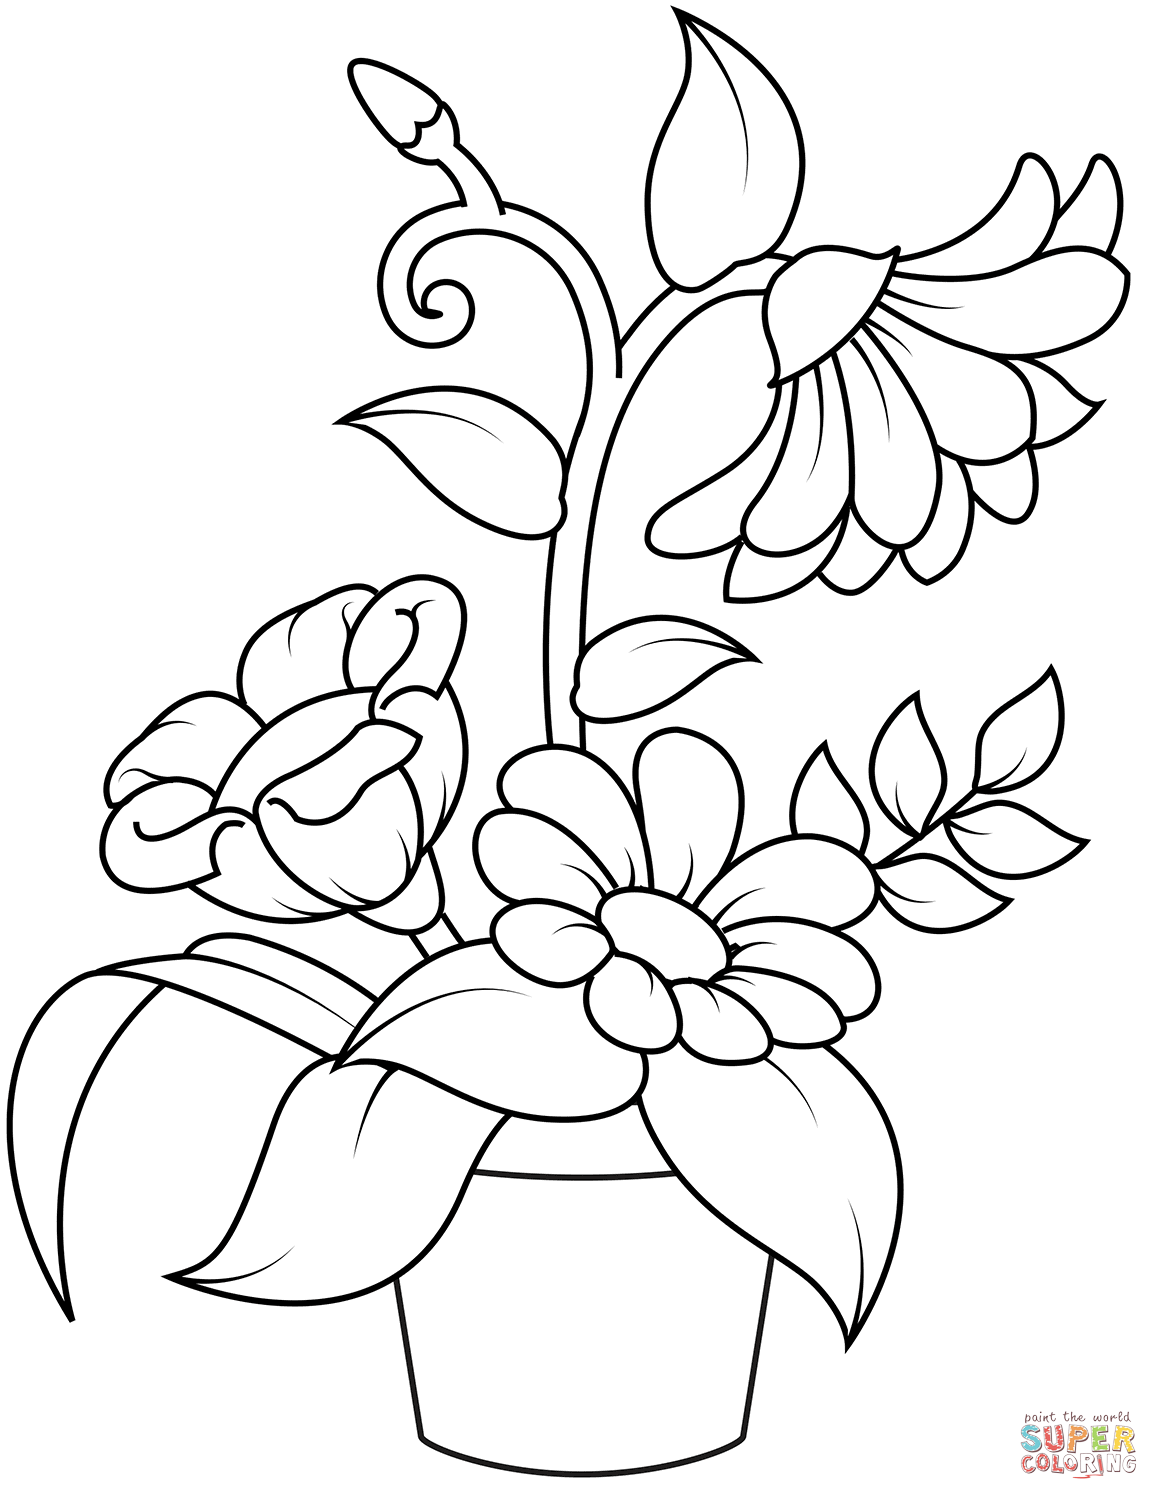 Flowerpot coloring page | Free Printable Coloring Pages